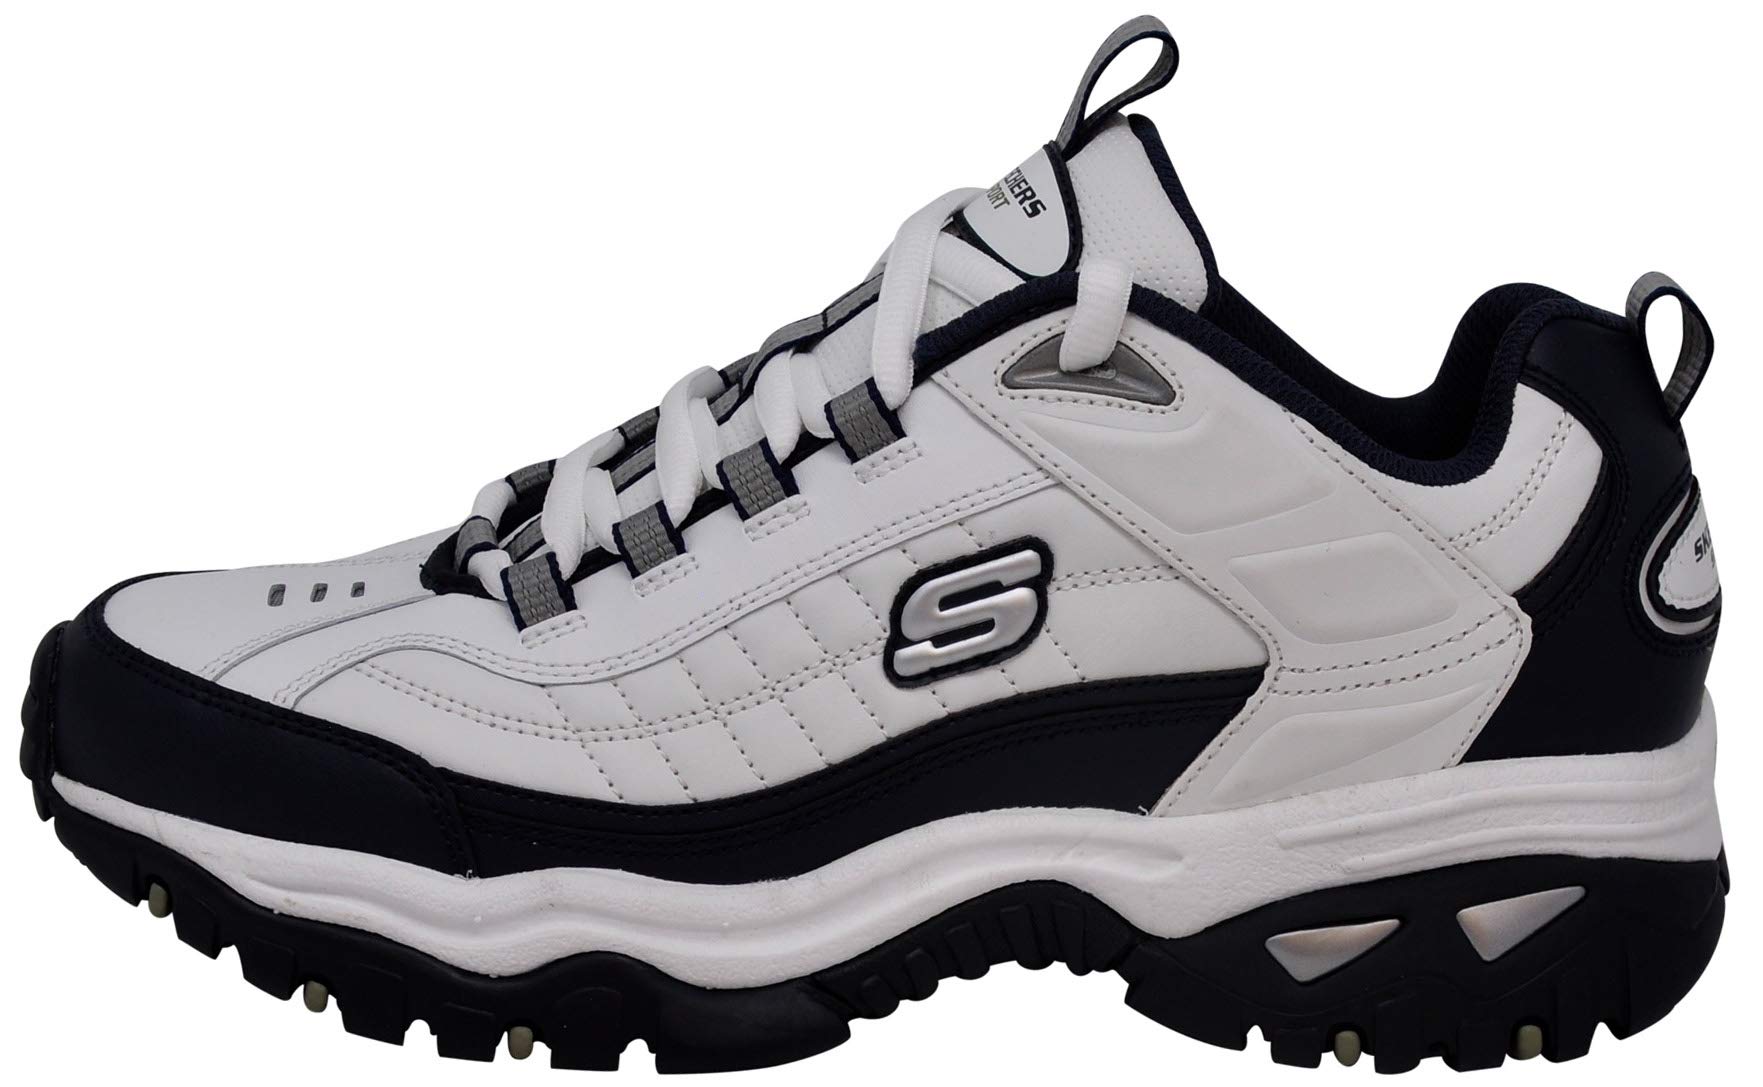 Skechers Men's Energy Afterburn Shoes Lace-Up Sneaker, White/Navy, 6.5 Wide